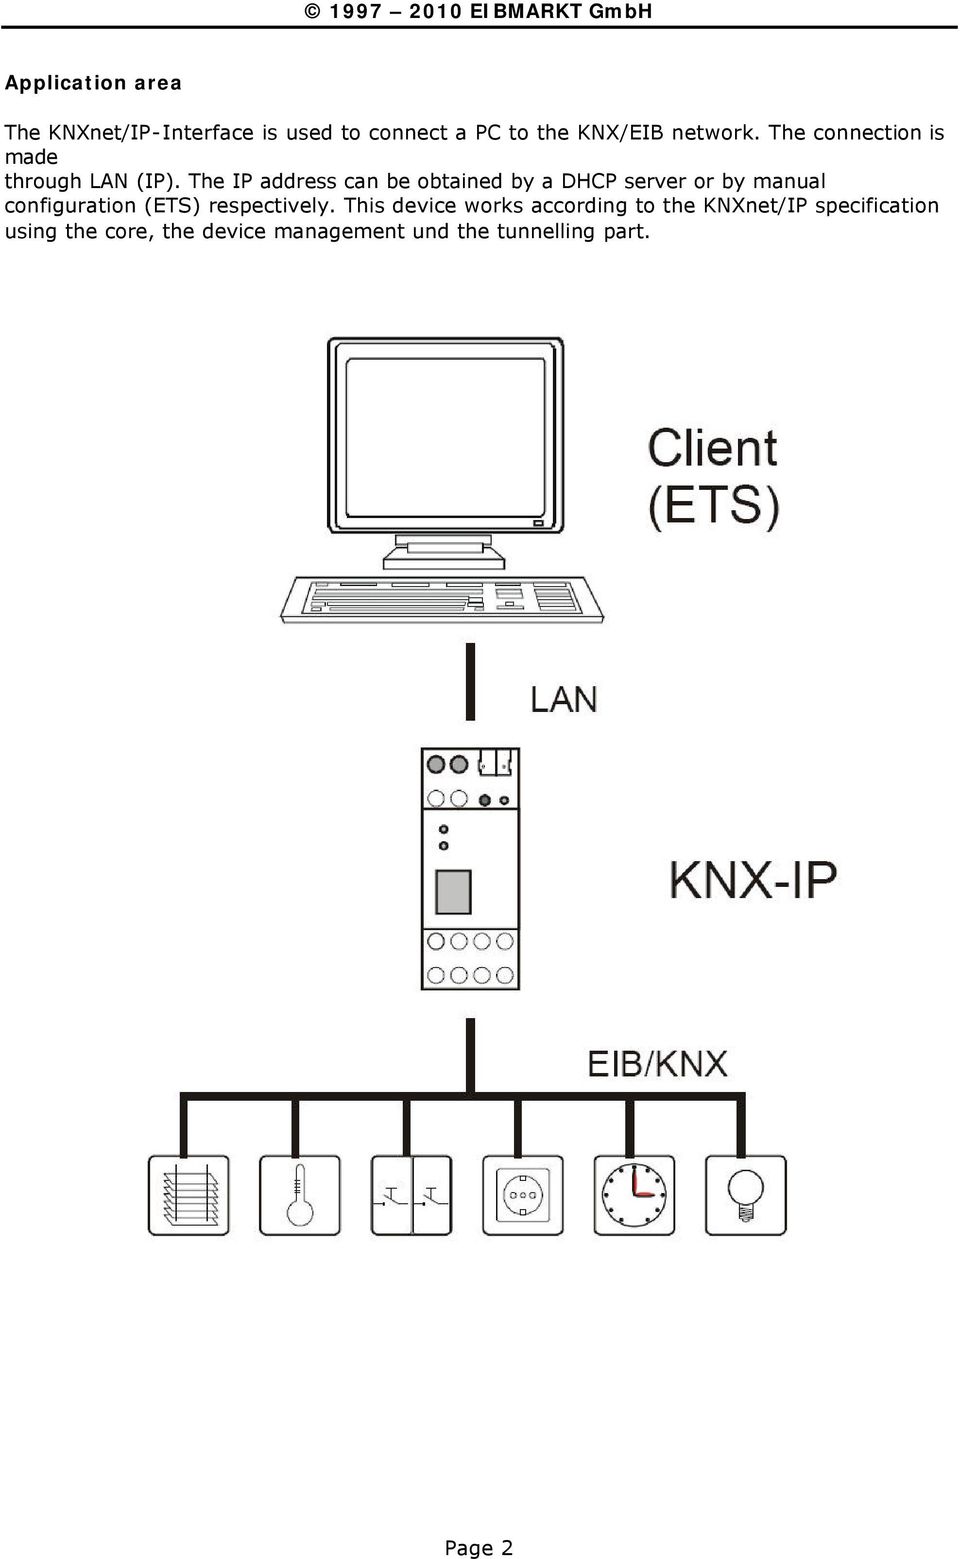 The IP address can be obtained by a DHCP server or by manual configuration (ETS)